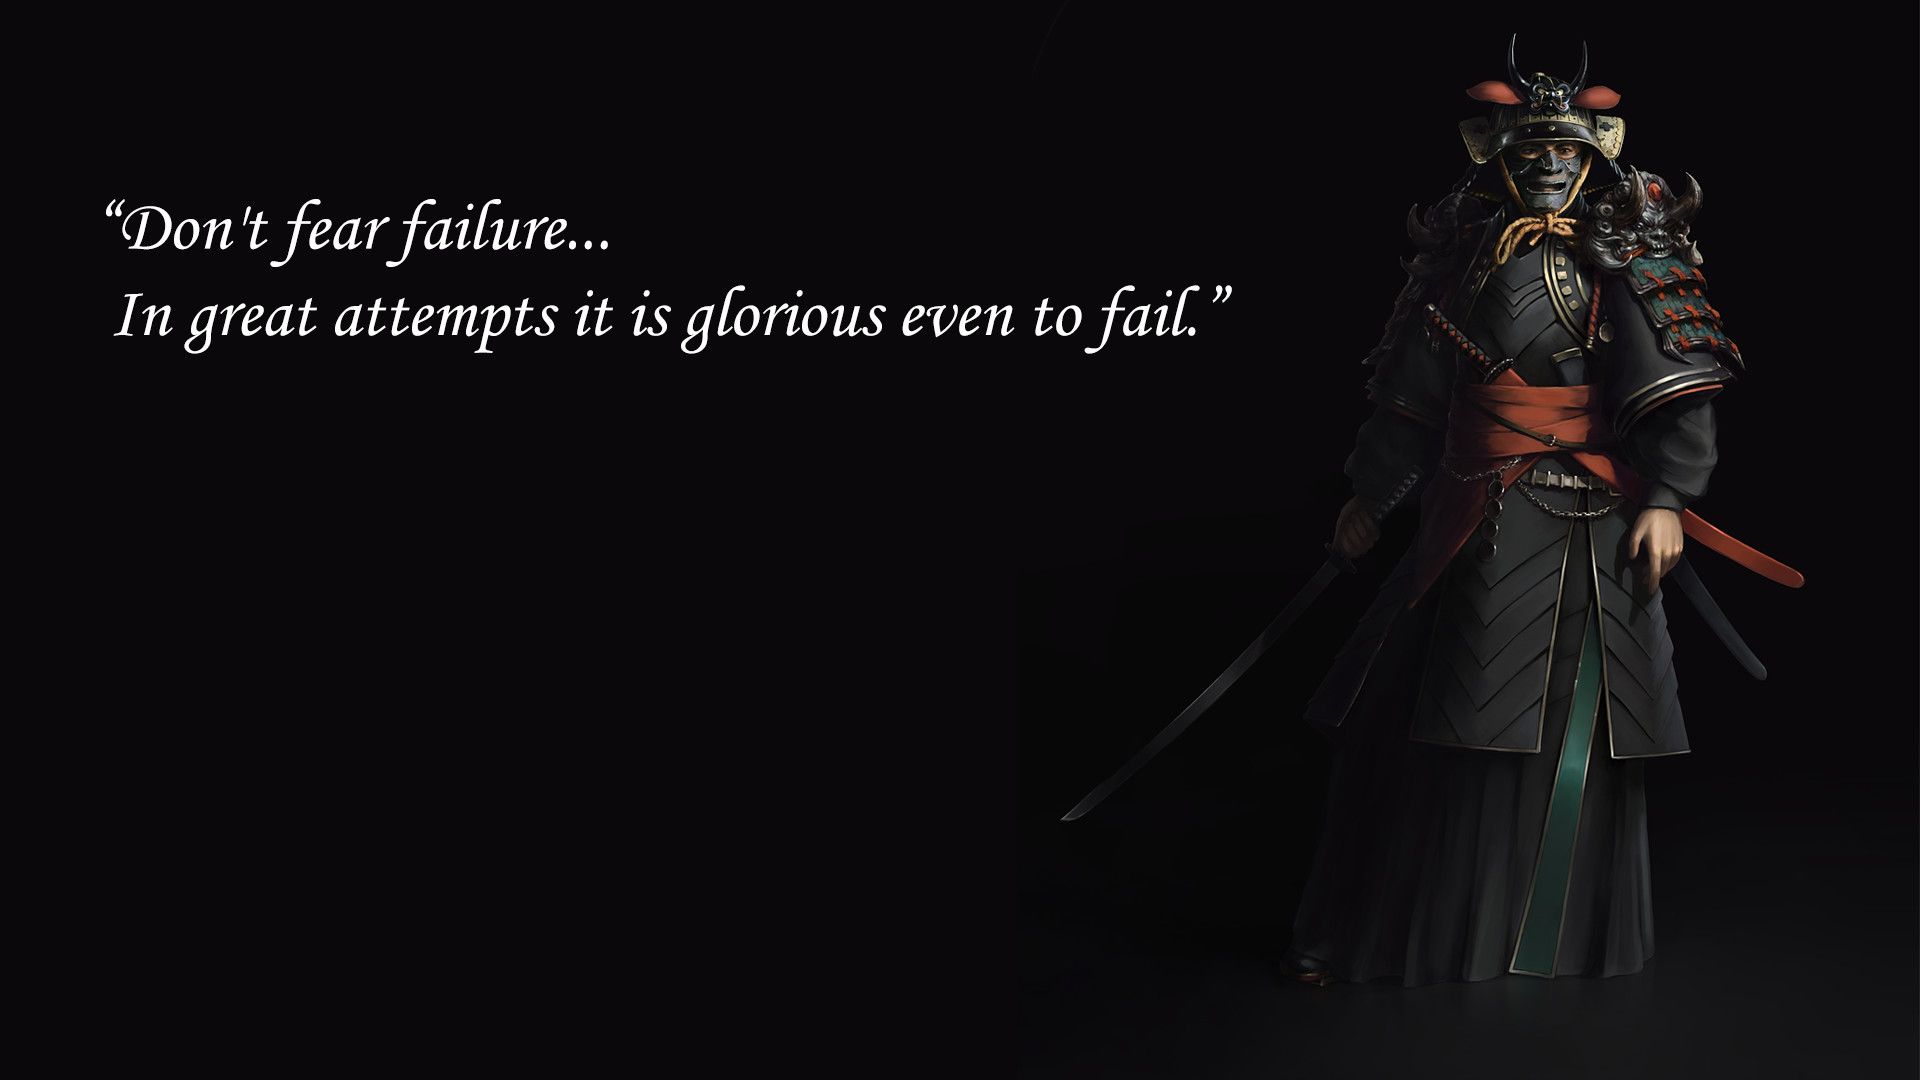 A woman in armor with swords and the words don't fear failure - Samurai